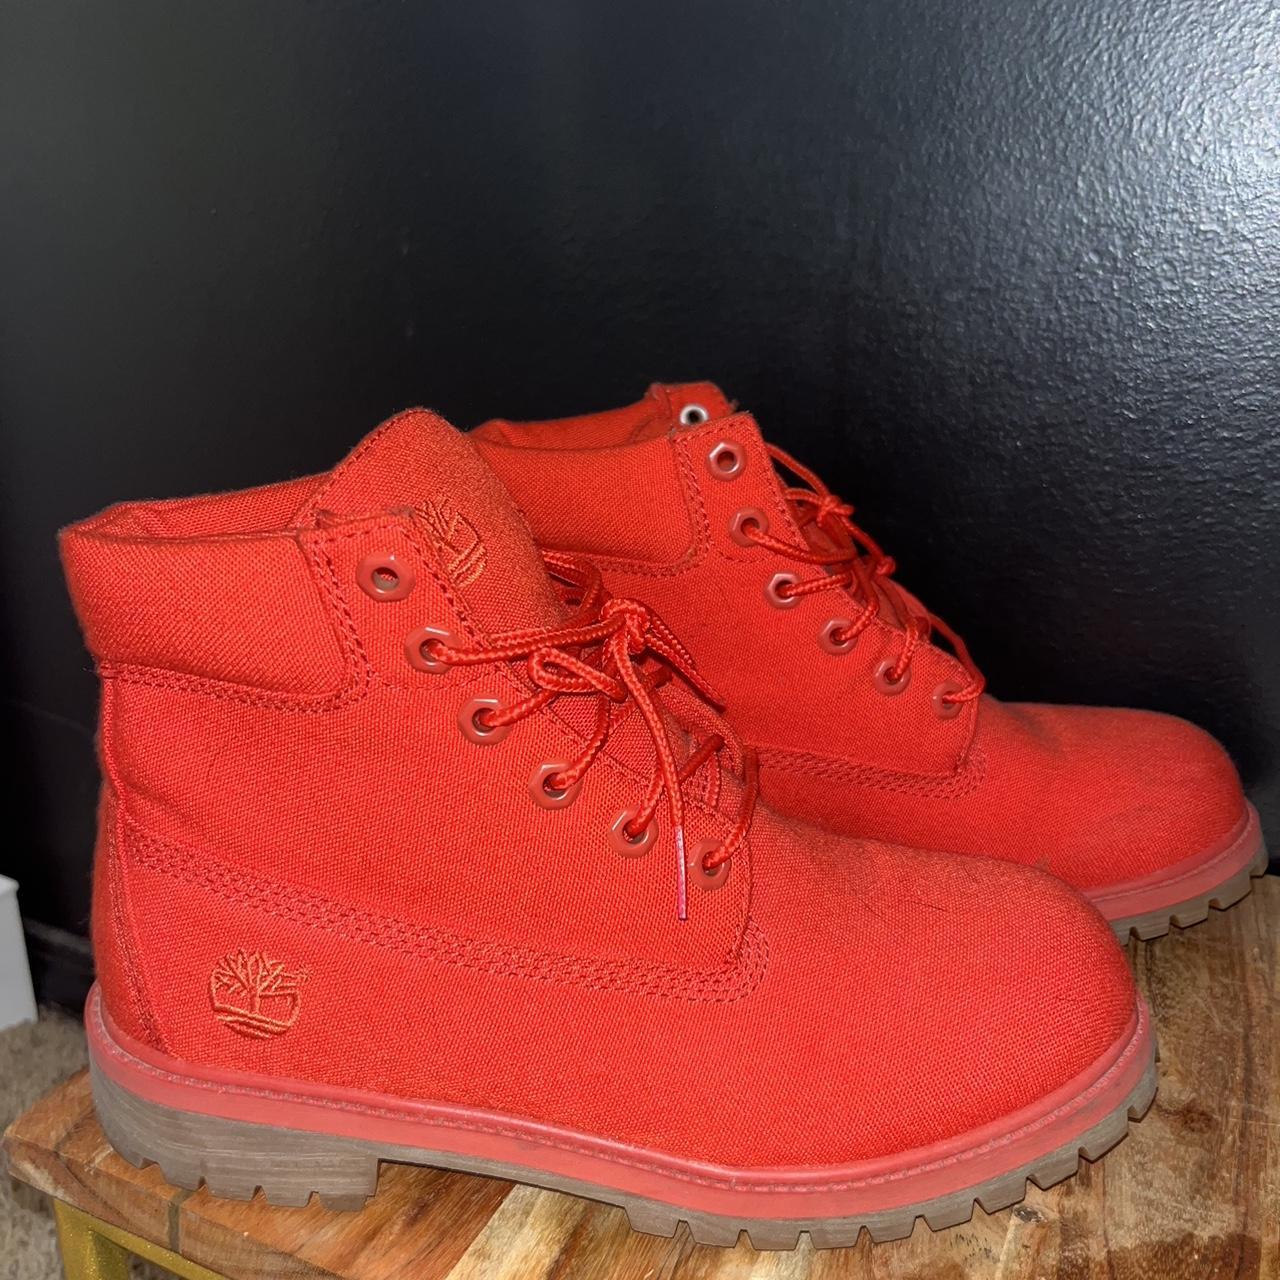 Red Timberland Boots size 7/7.5 #timberlands #boots... - Depop